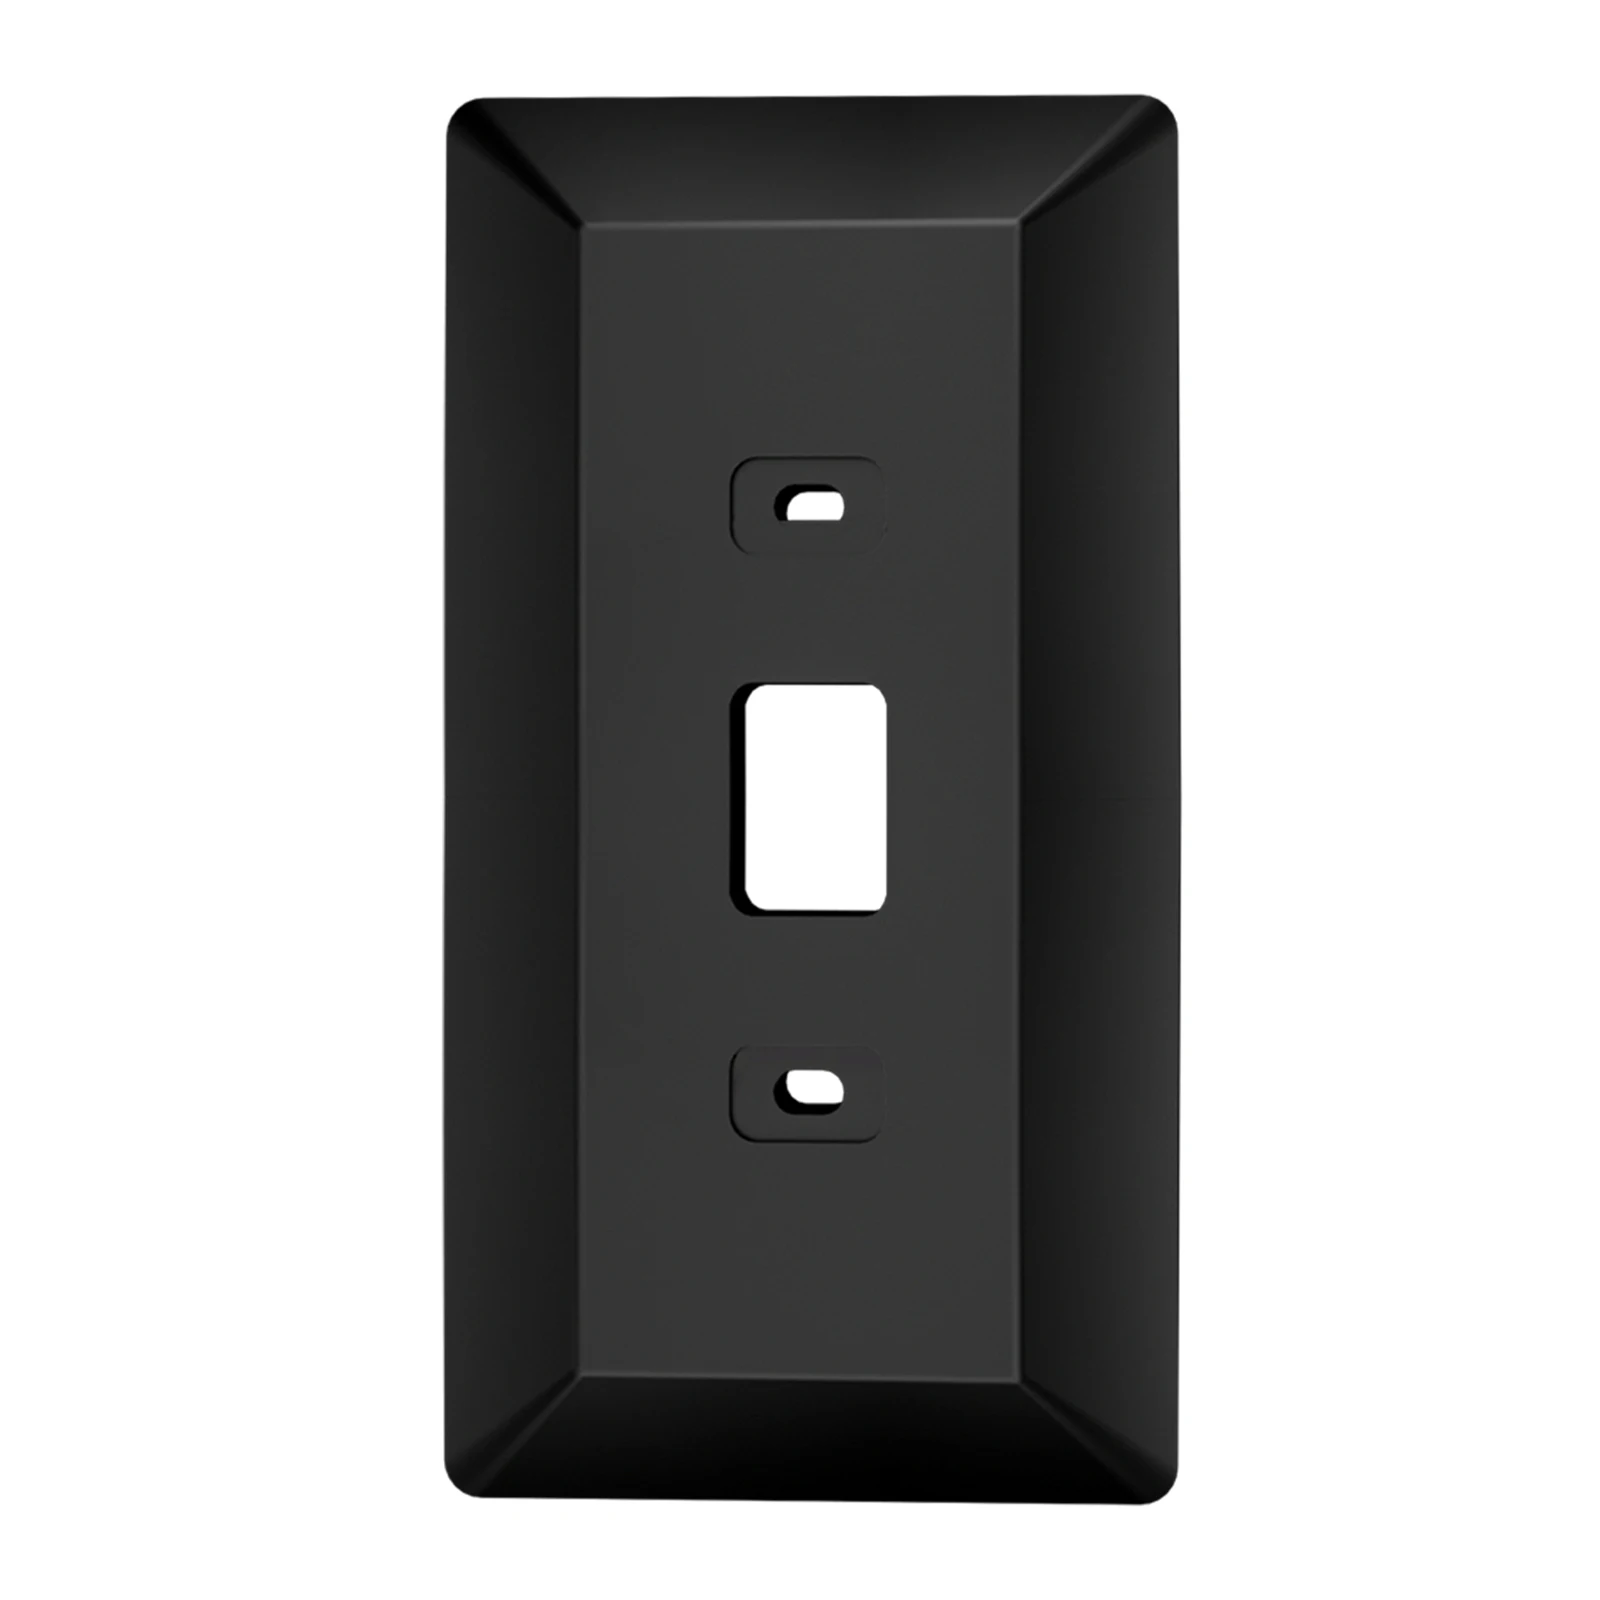 

Wall Plate Come with L35°/R35 ° Wedge Compatible With Eufy Video Doorbell 2K Resolution (Wired), Eufy Video Doorbell